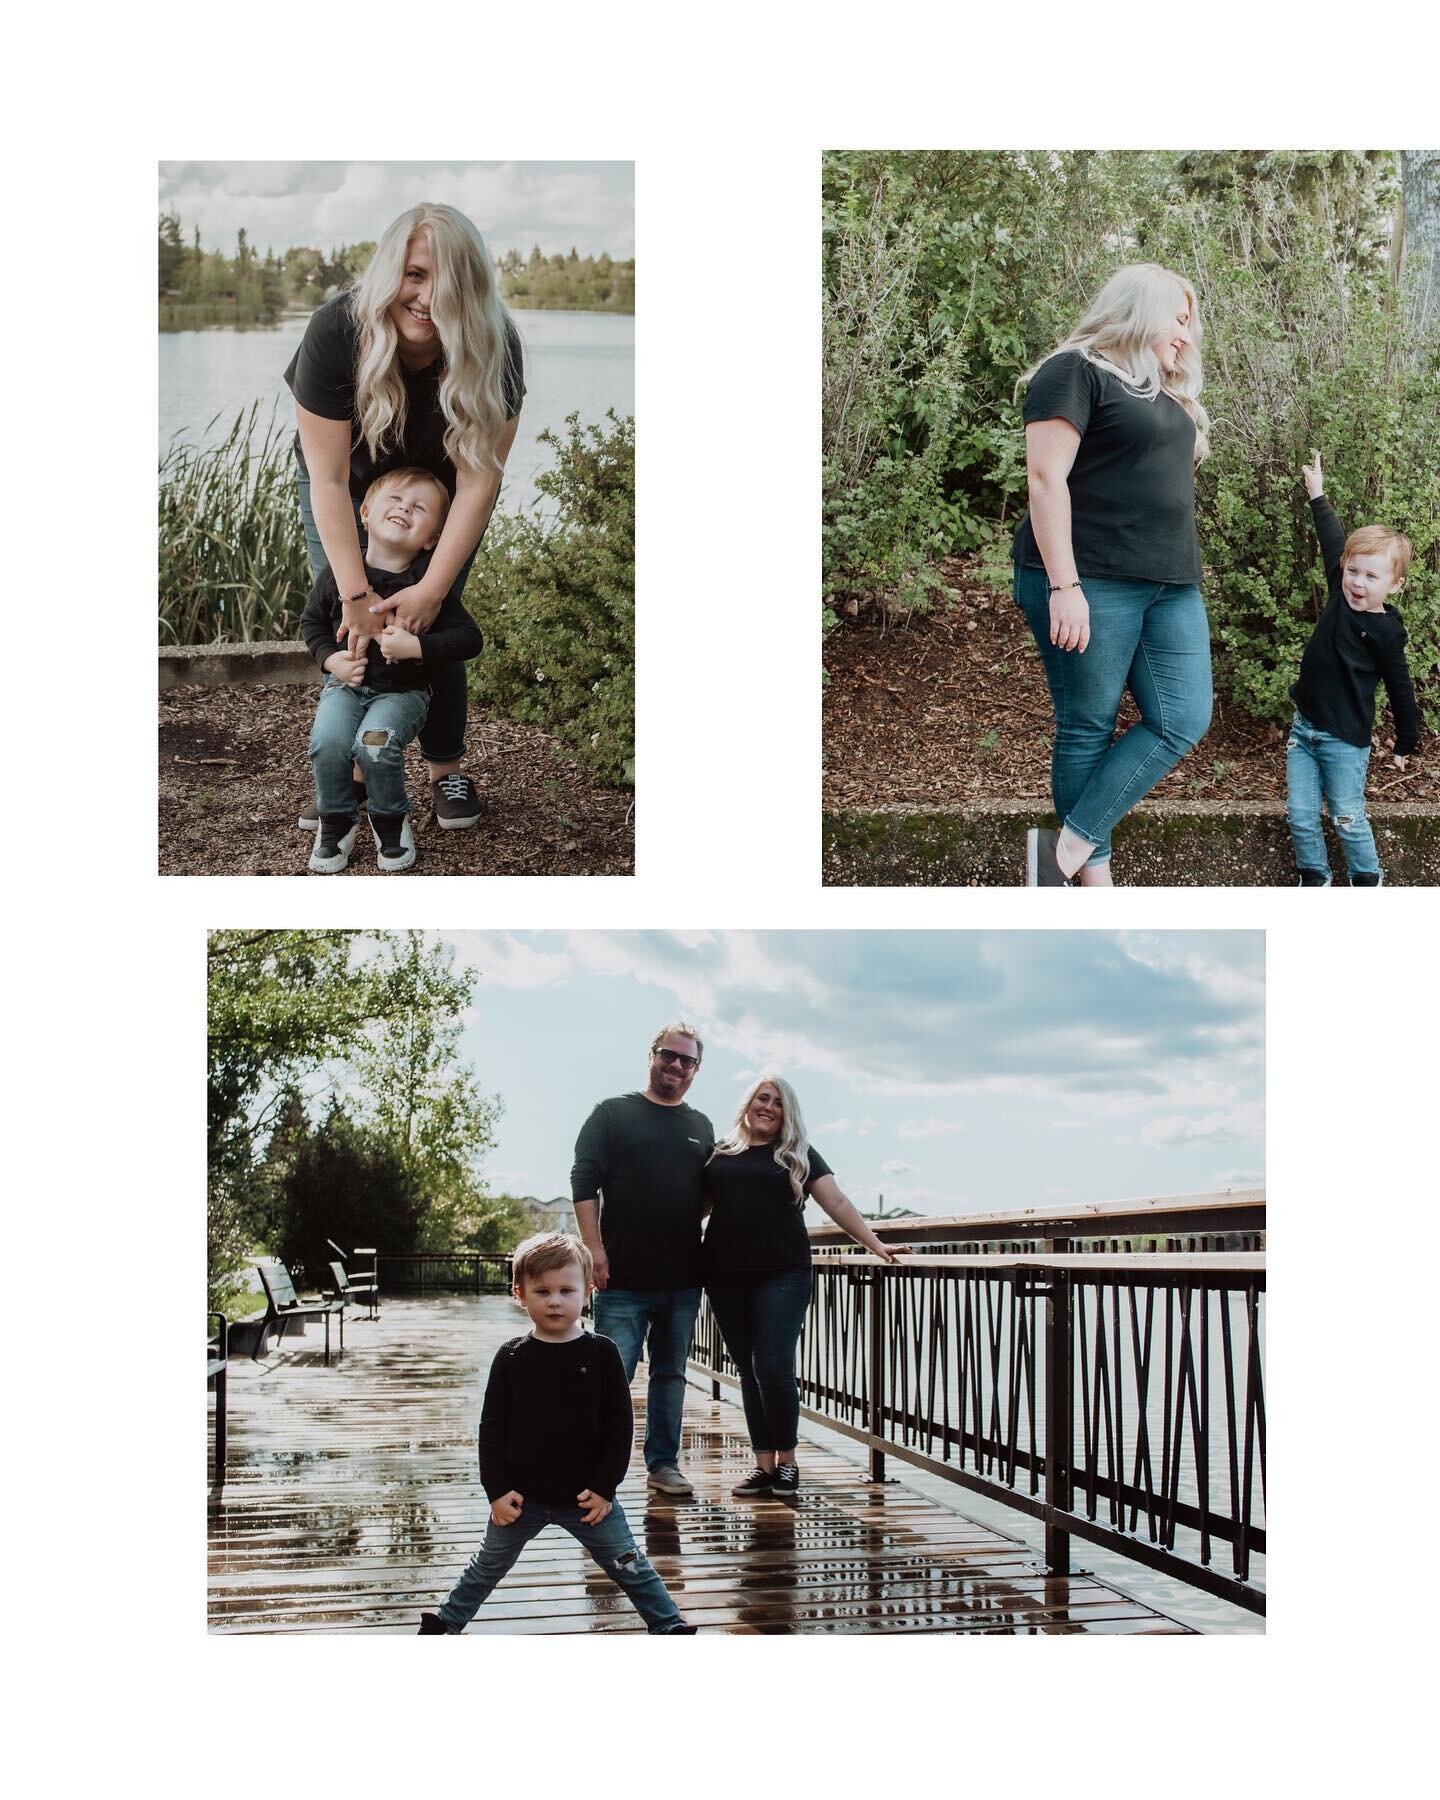 A few sneak peaks from this weekends adorable family session ! #yegphotographer #stpaulphotographer #familyphotography #portraitphotography